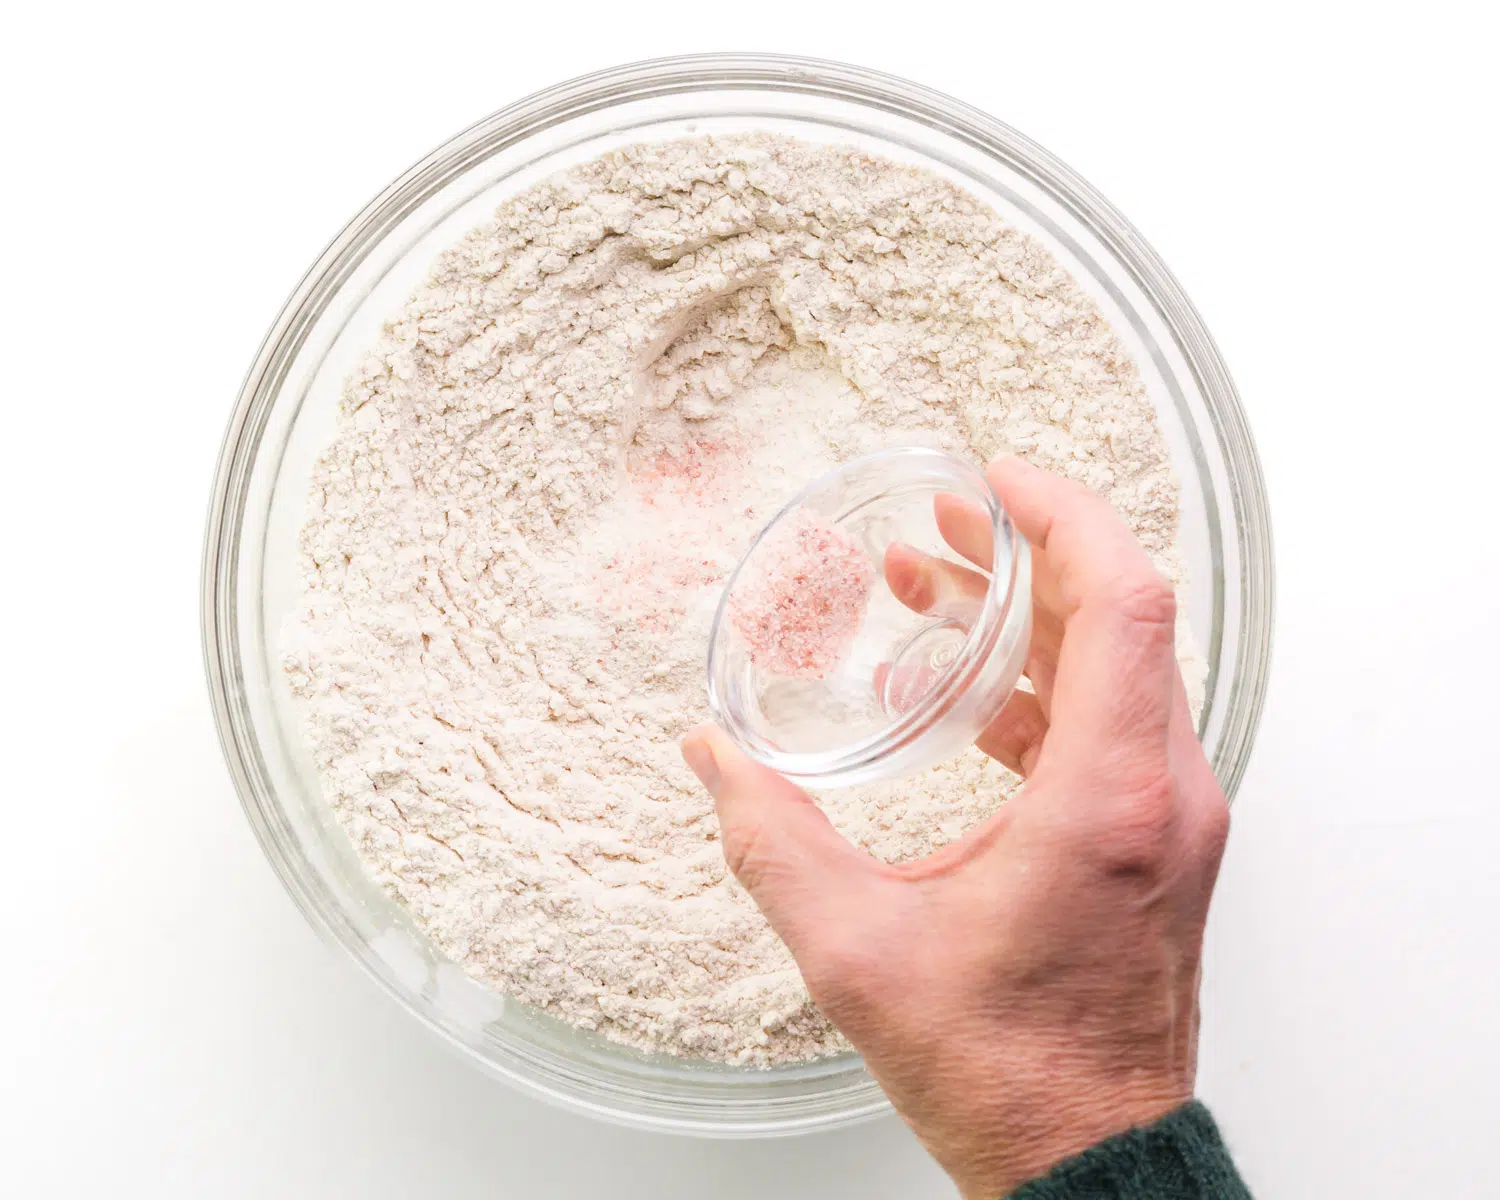 A hand holds a bowl sprinkling pink salt over a bowl with flour.